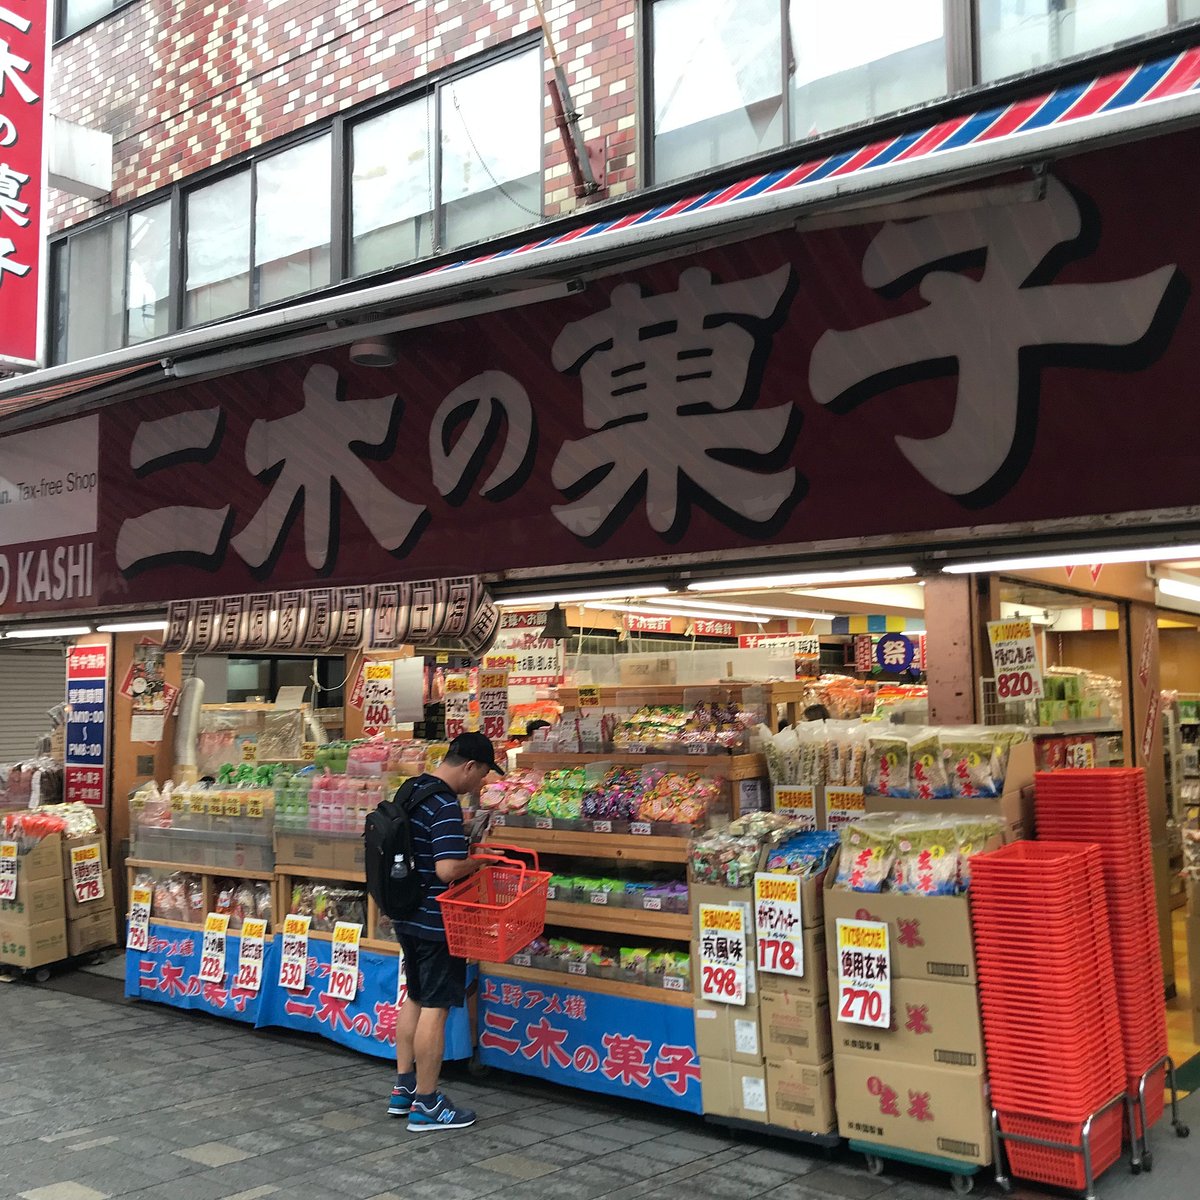 Tokyo Treat Delivers Snacks Direct From Japan - The City Lane